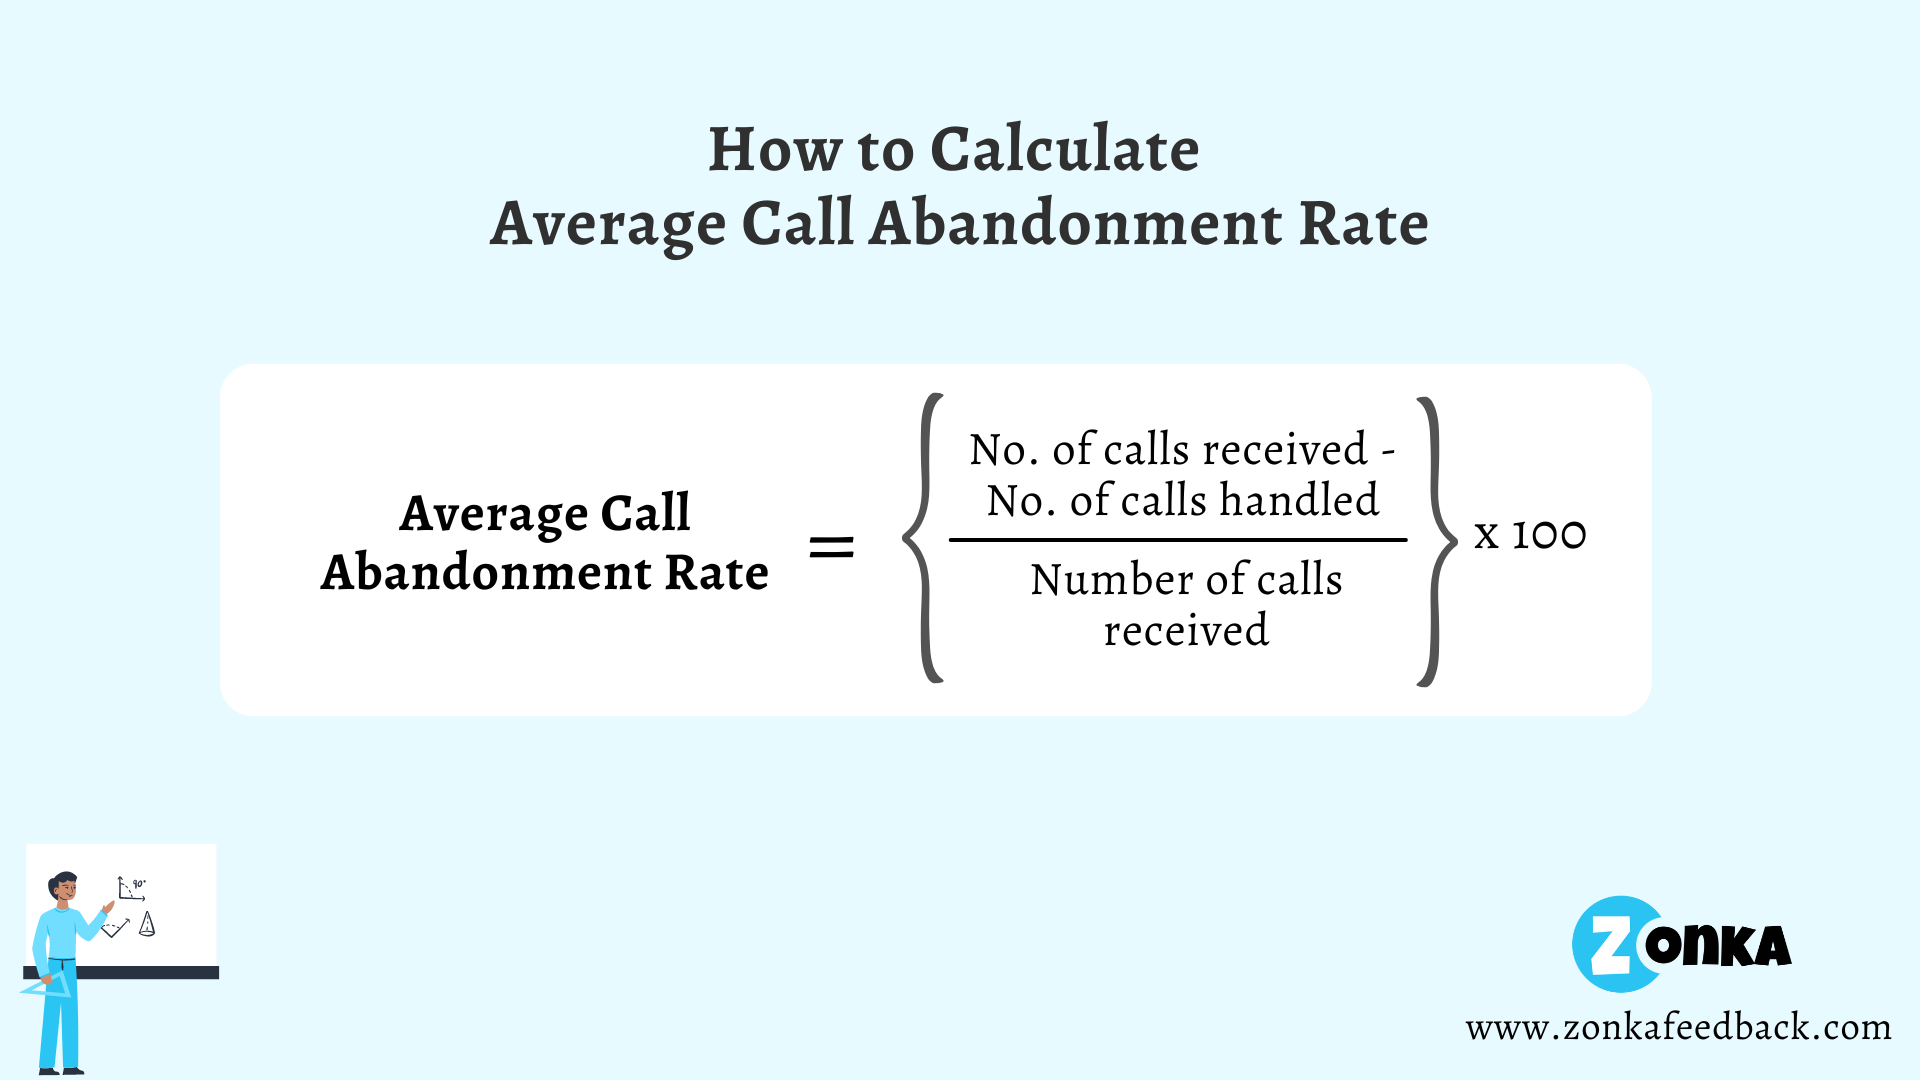 Formula to Calculate Average Call Abandonment Rate